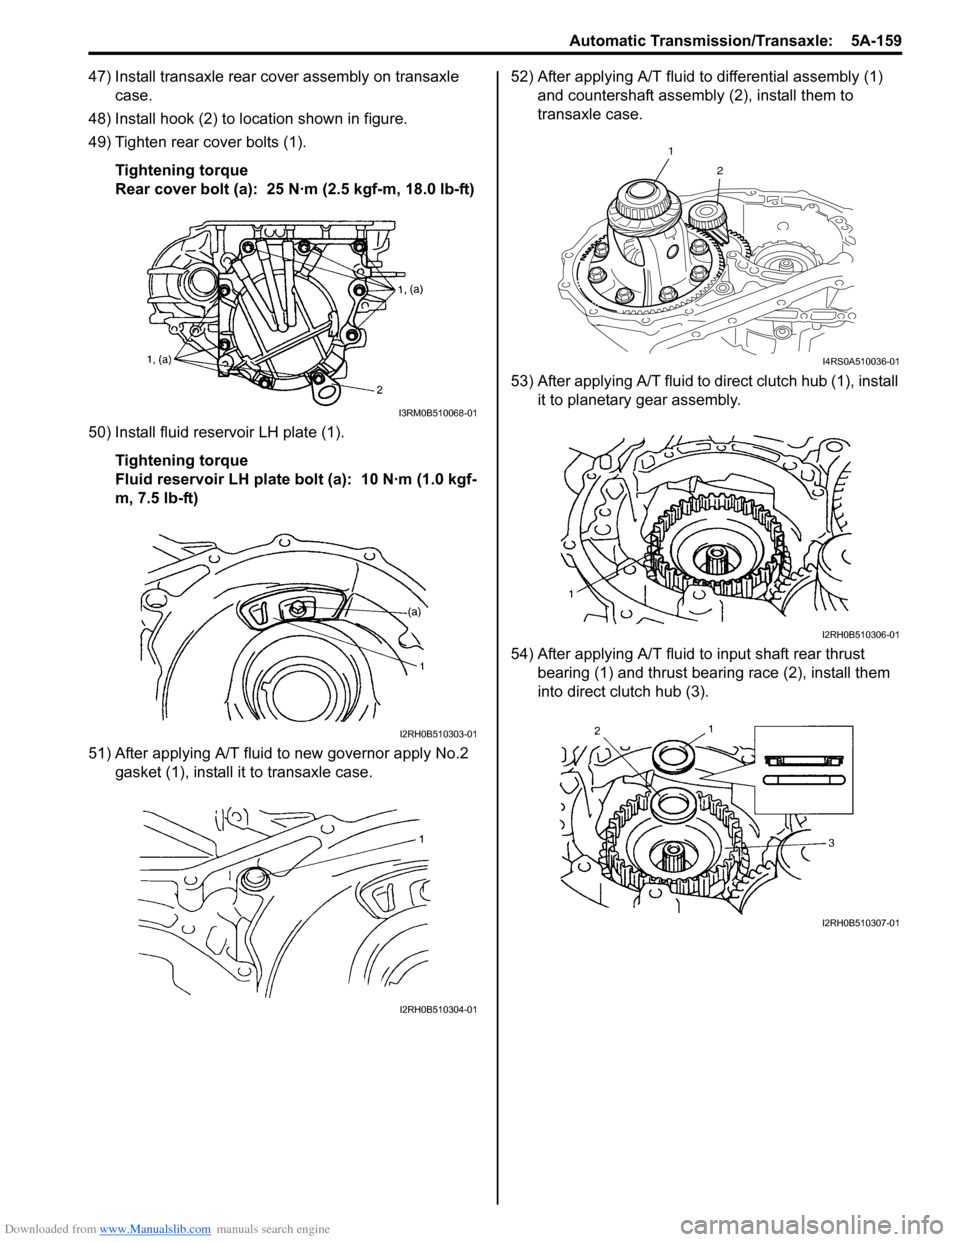 SUZUKI SWIFT 2007 2.G Service Workshop Manual Downloaded from www.Manualslib.com manuals search engine Automatic Transmission/Transaxle:  5A-159
47) Install transaxle rear cover assembly on transaxle case.
48) Install hook (2) to location shown i